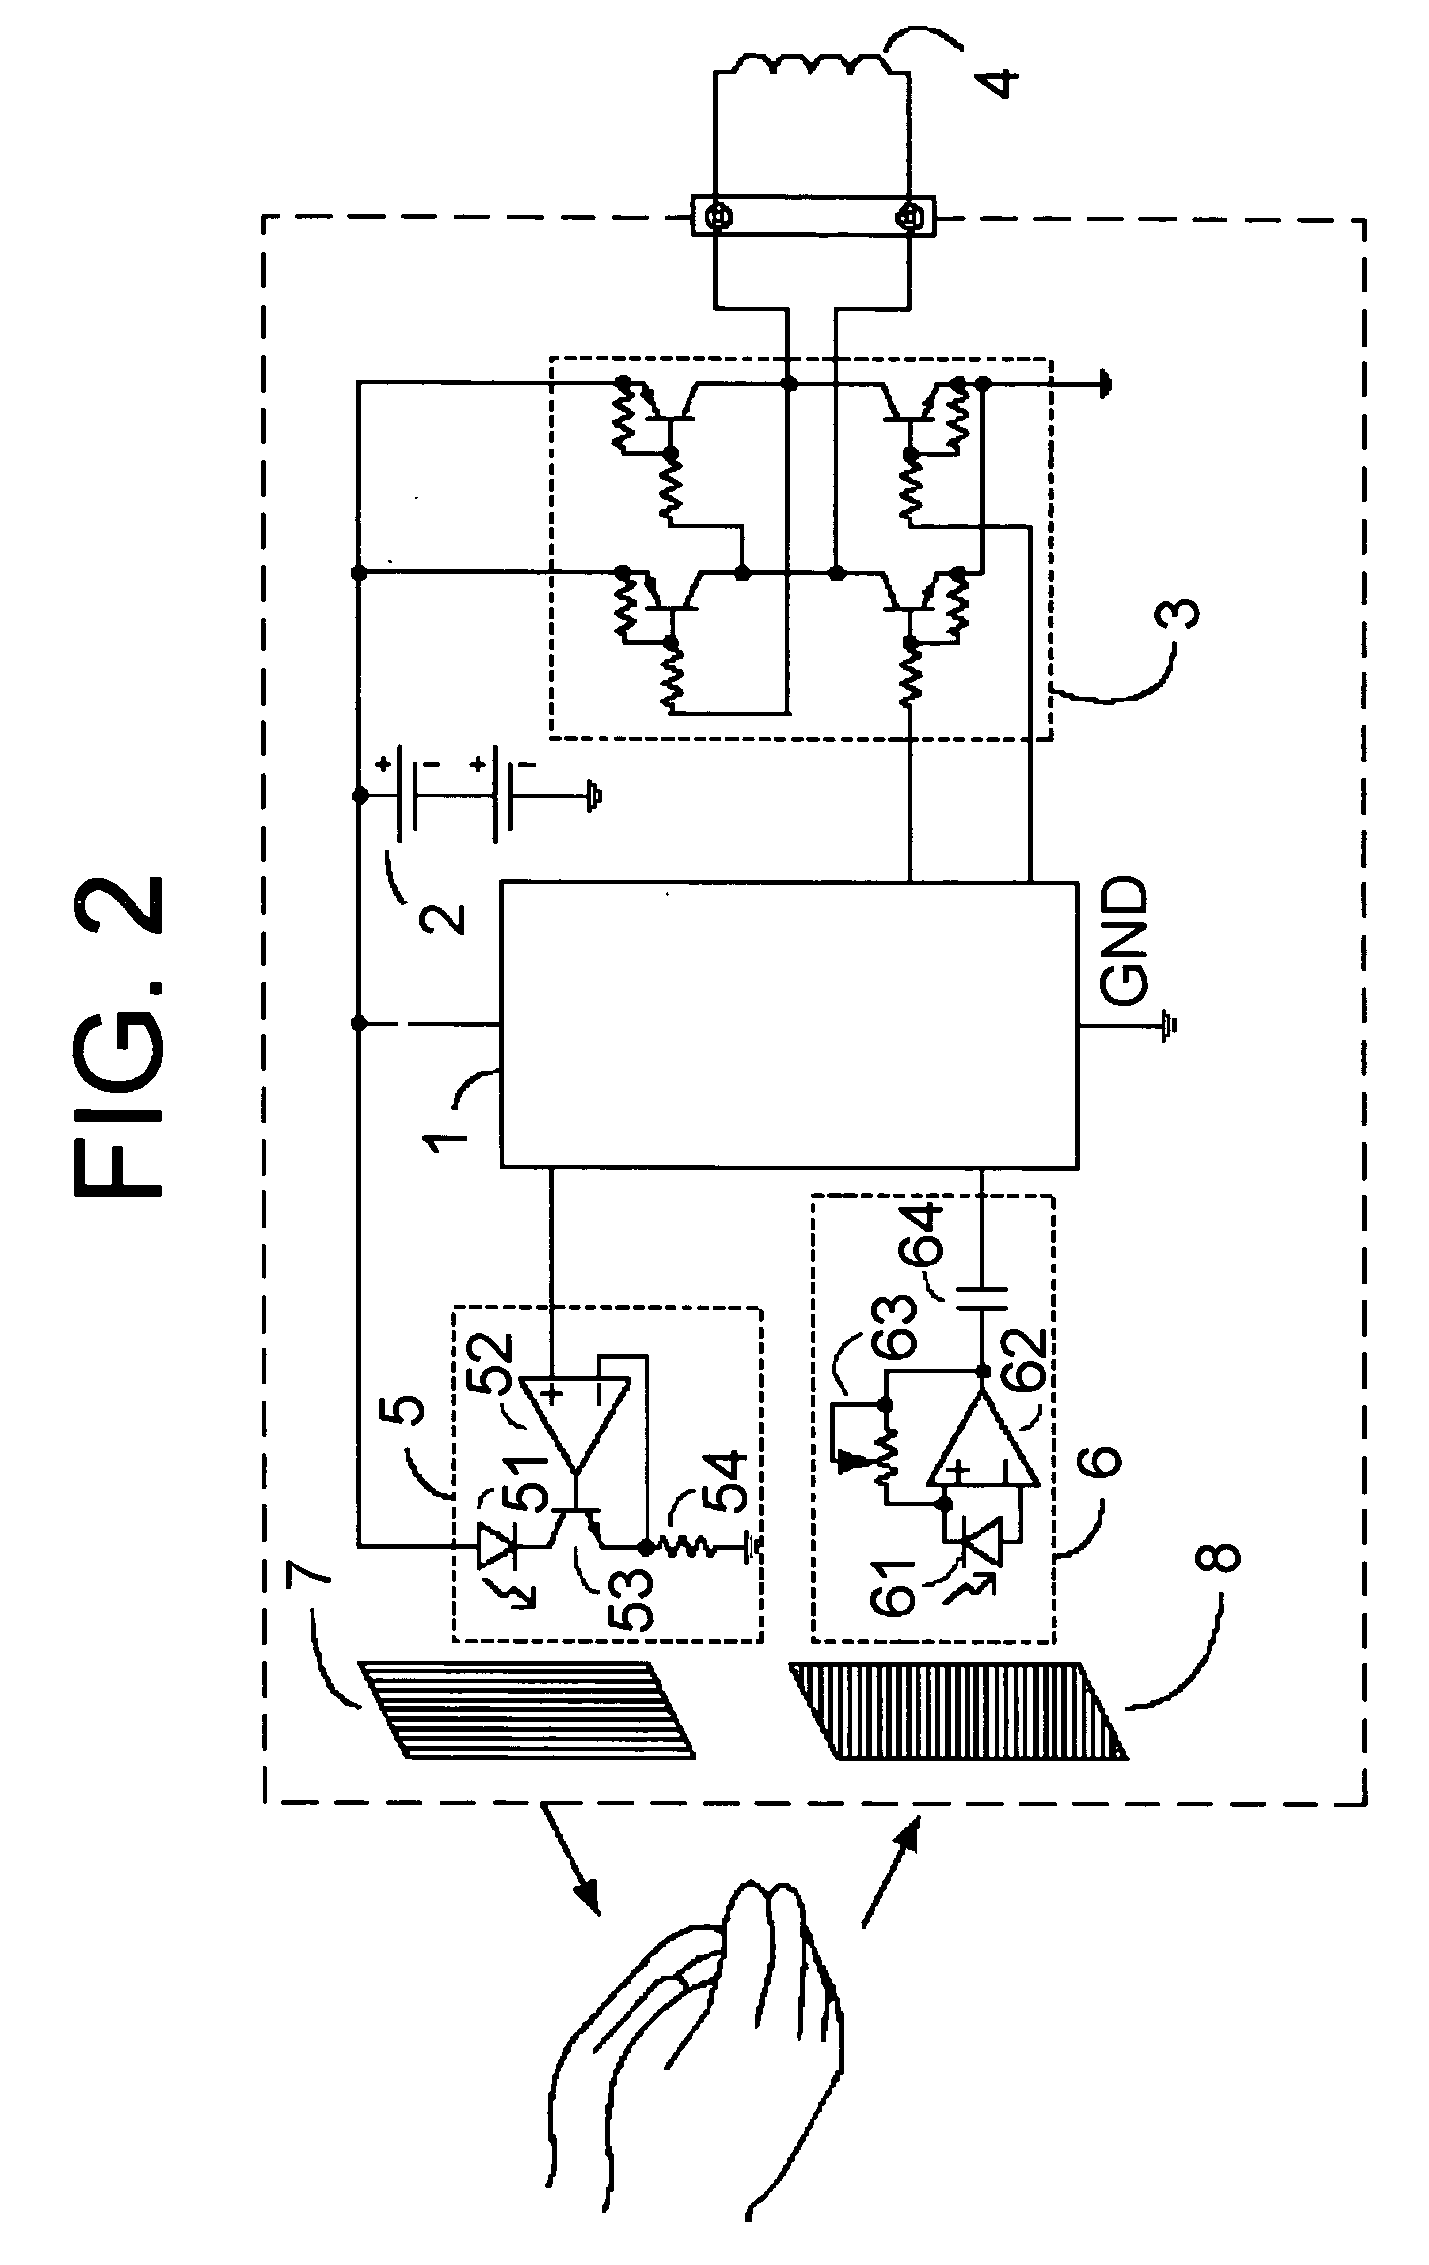 Automatic faucet control device and control method